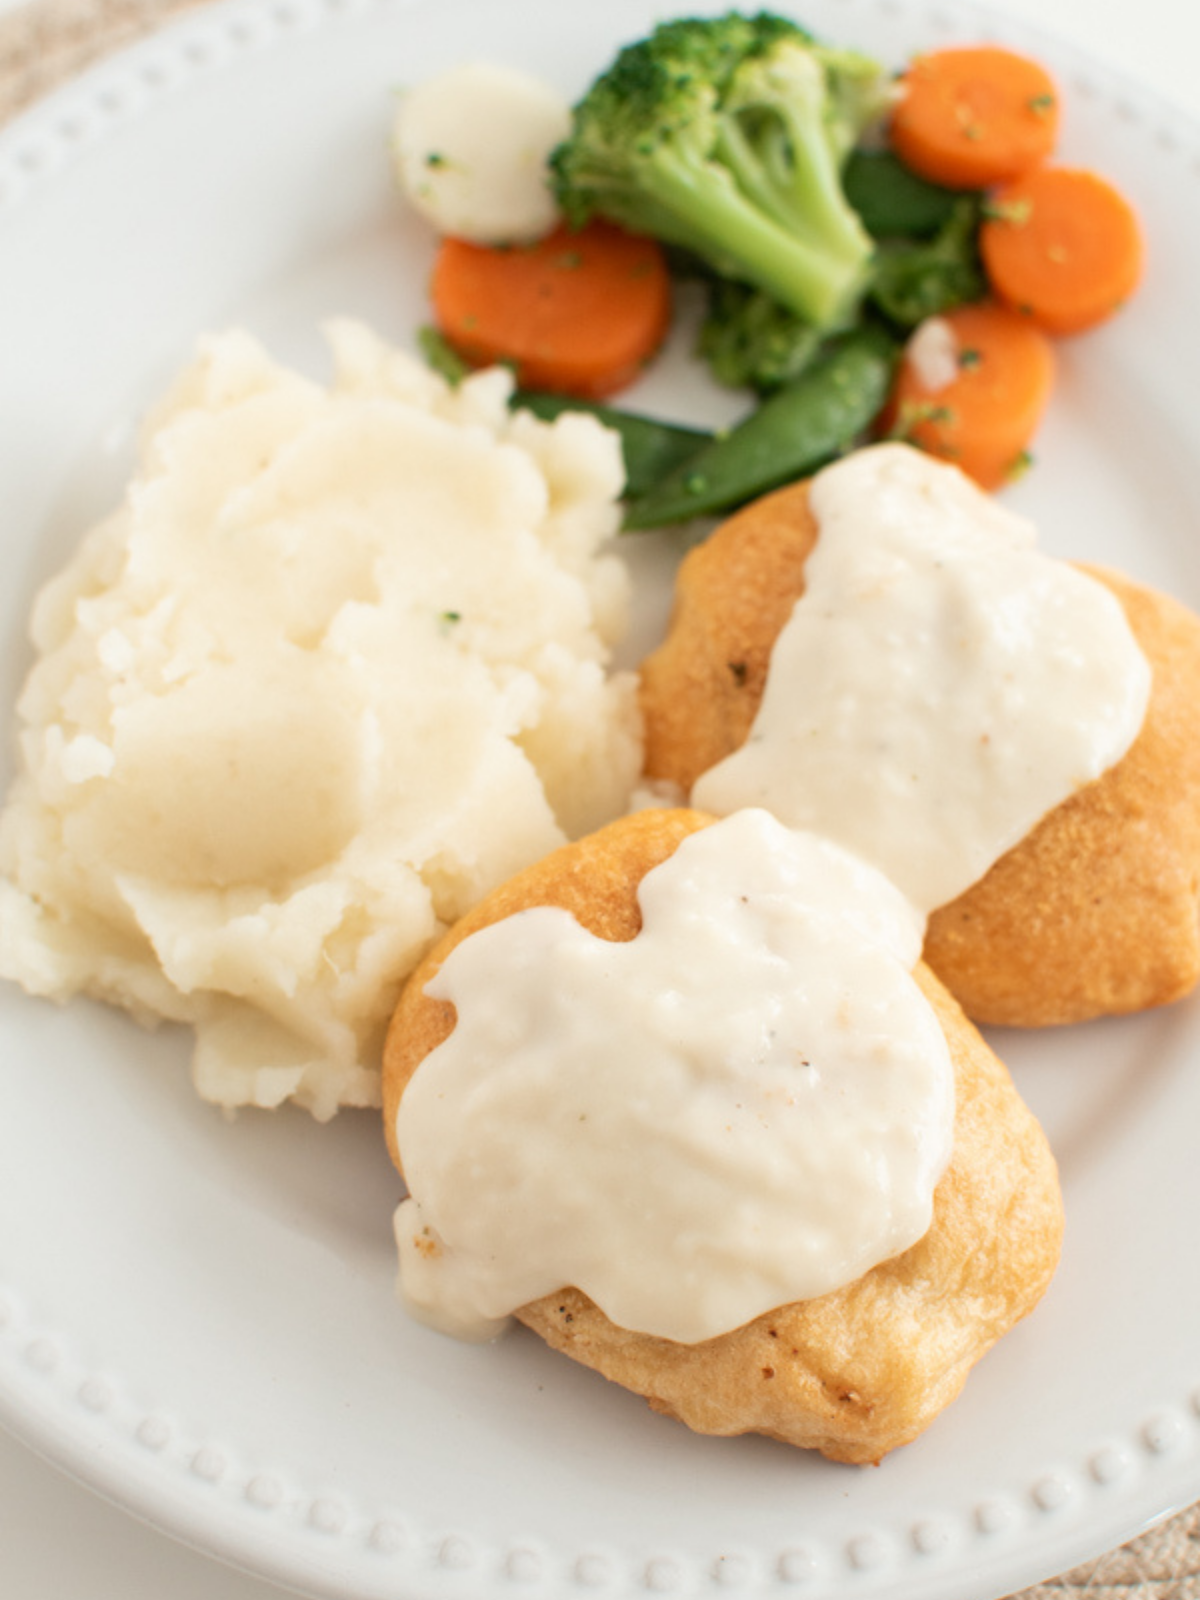 Chicken pillows with gravy on a white plate next to side of mixed vegetables.